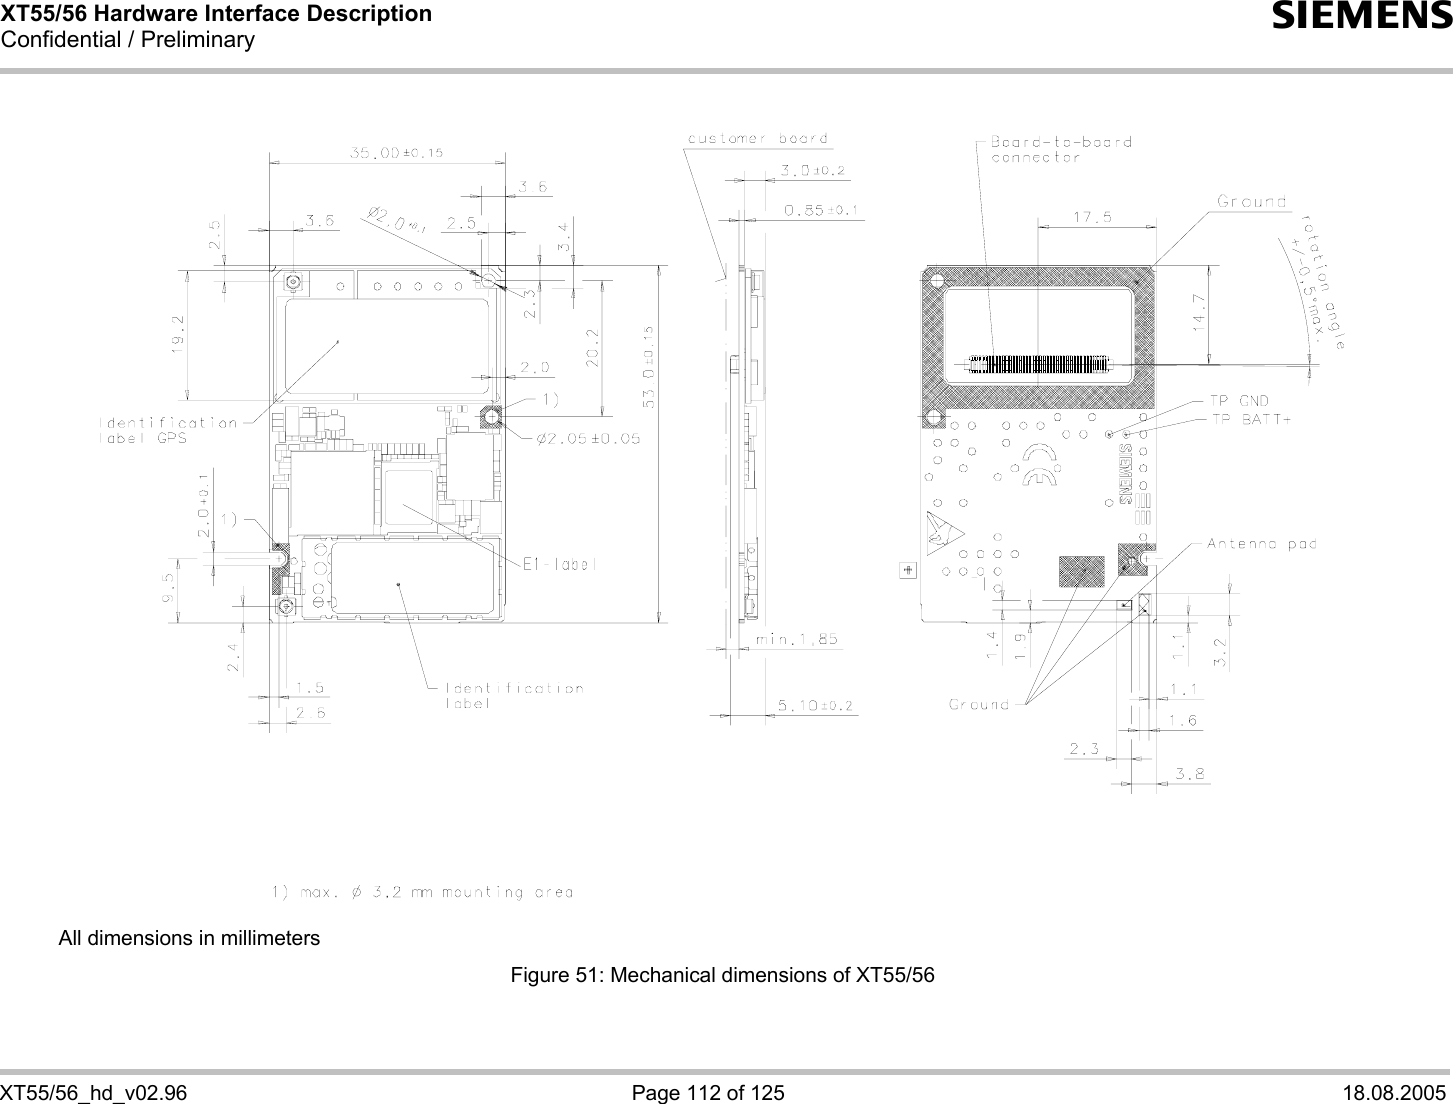 XT55/56 Hardware Interface Description Confidential / Preliminary s   XT55/56_hd_v02.96  Page 112 of 125  18.08.2005       All dimensions in millimeters Figure 51: Mechanical dimensions of XT55/56  